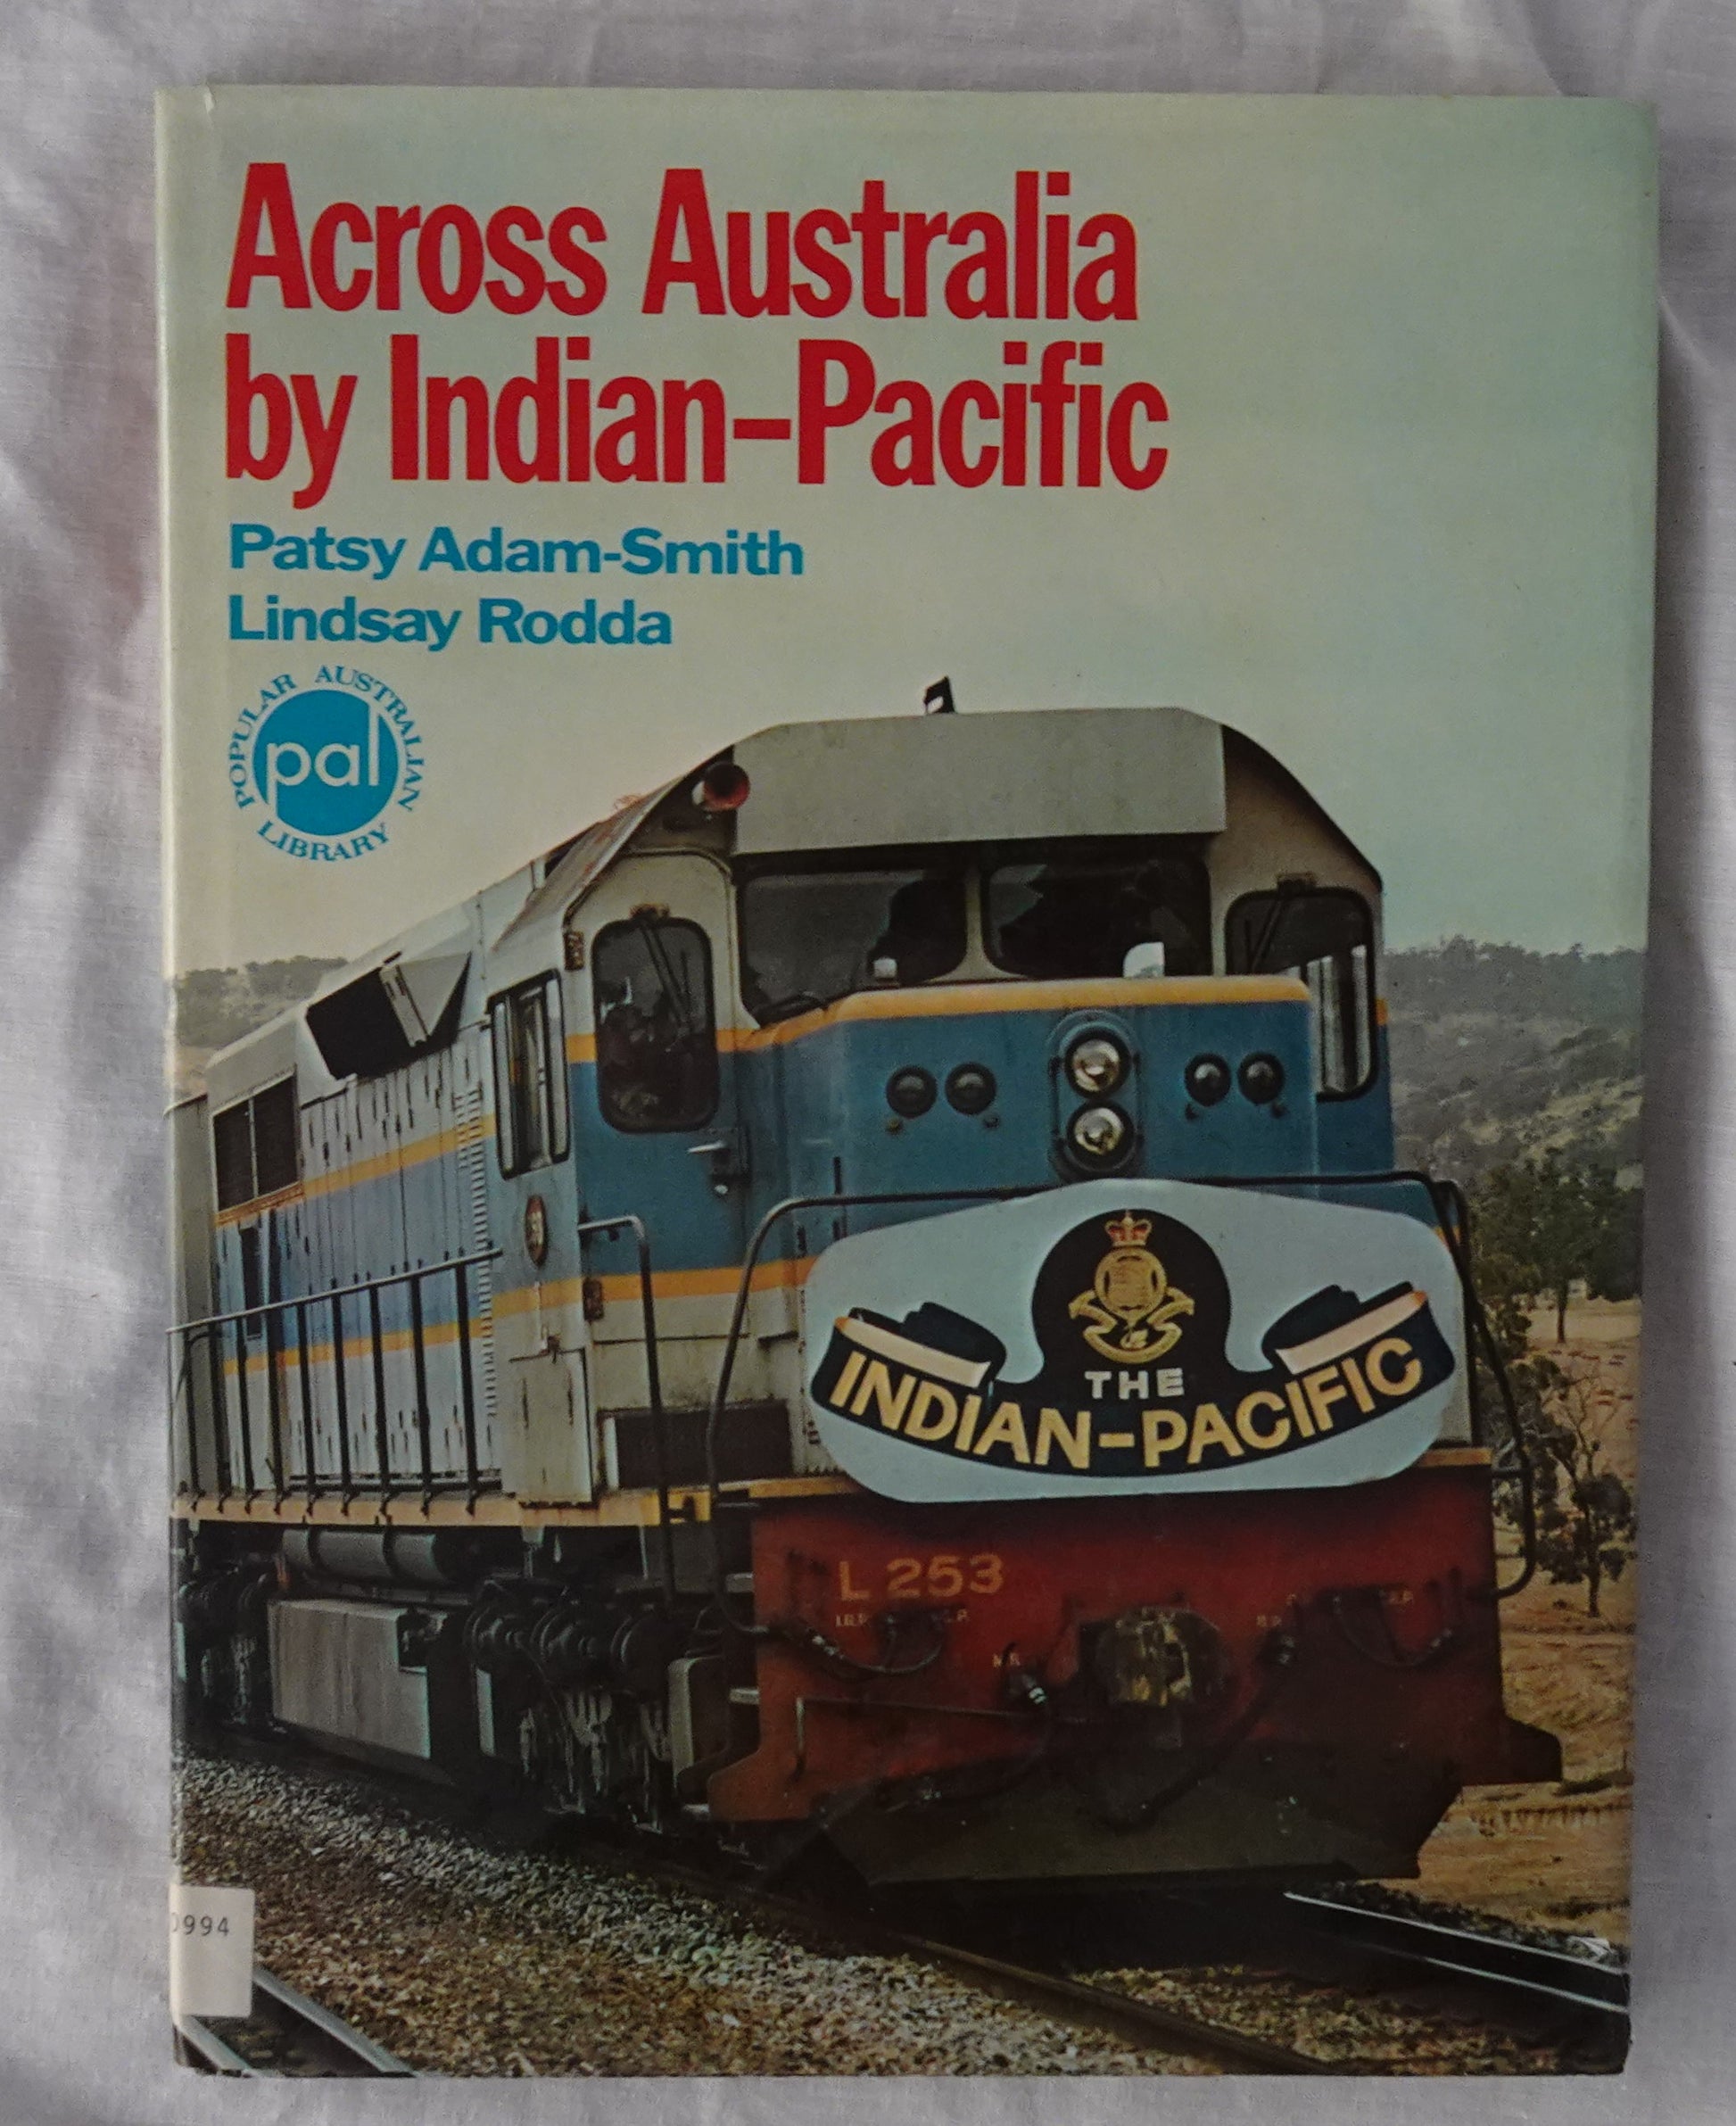 Across Australia by Indian Pacific  by Patsy Adam-Smith  Photography by Lindsay Rodda